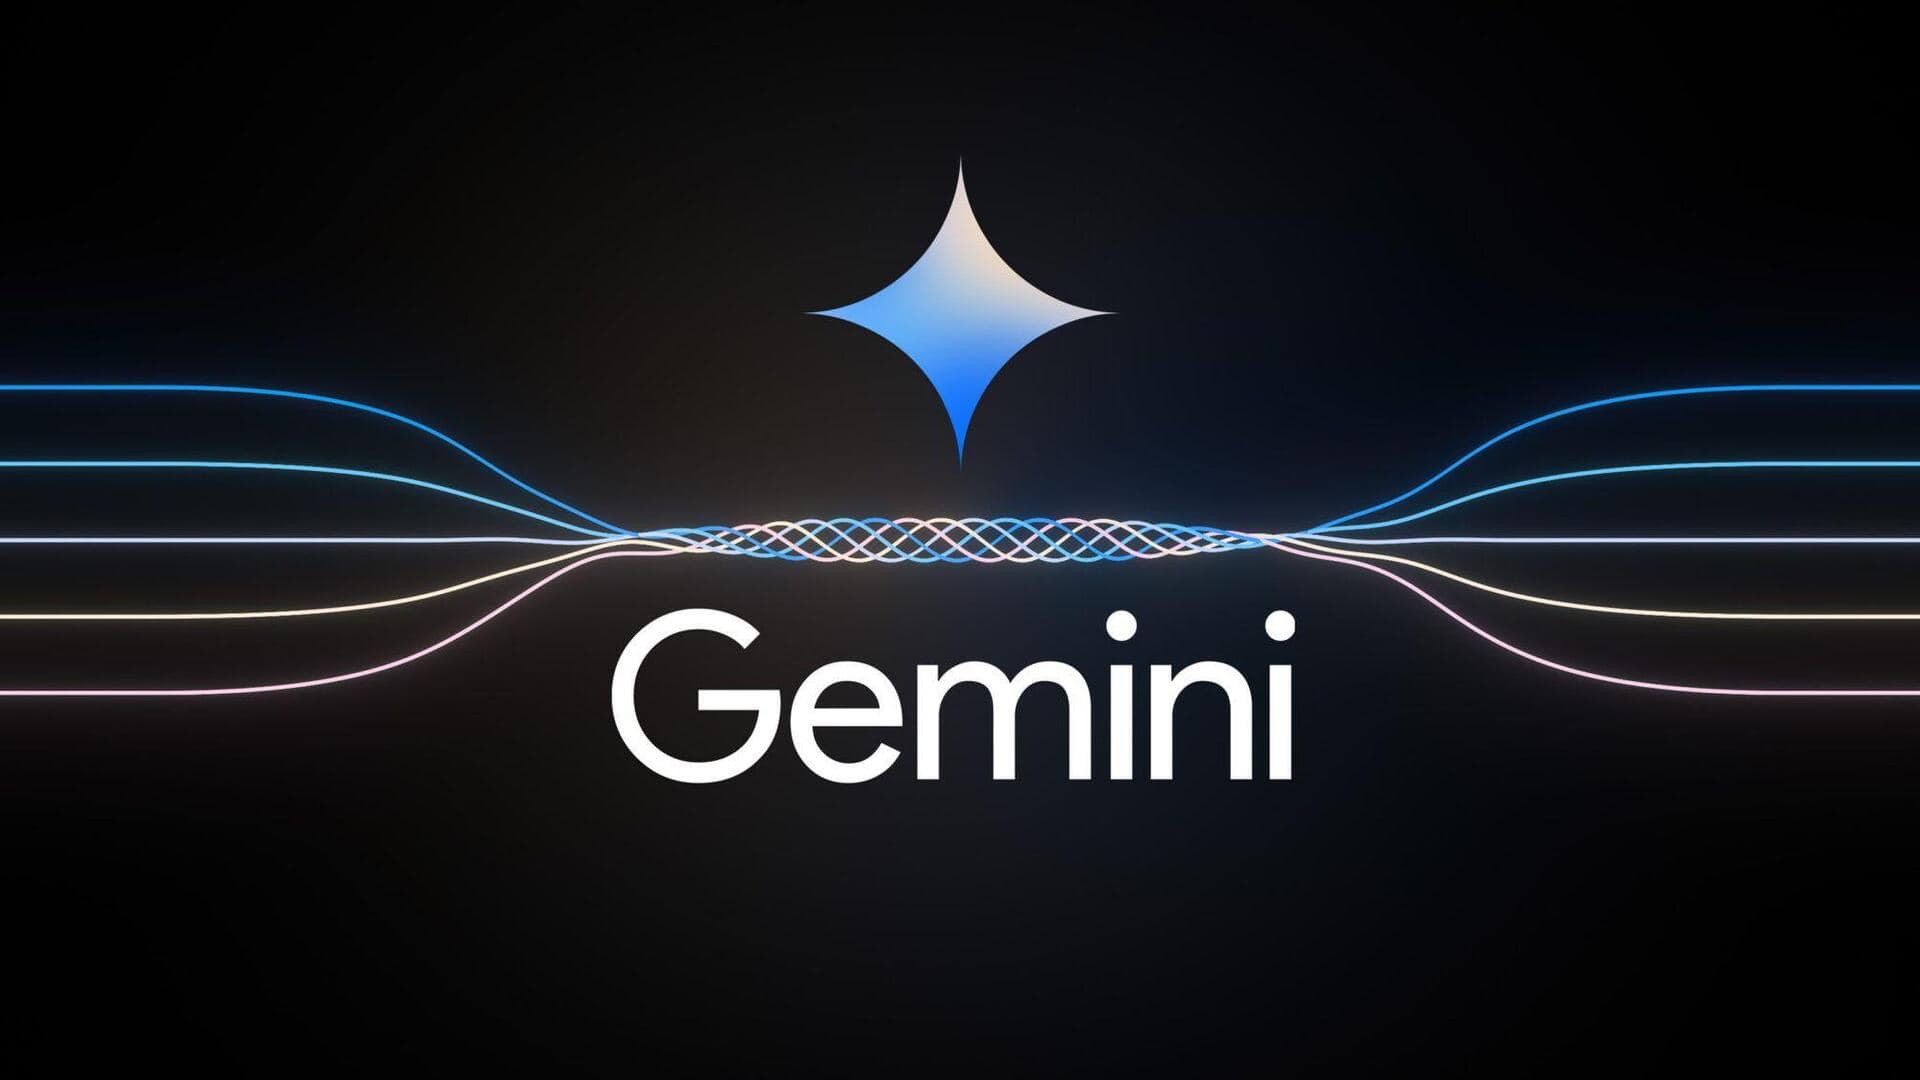 Google apologizes for Gemini AI bot's inaccurate historical depictions